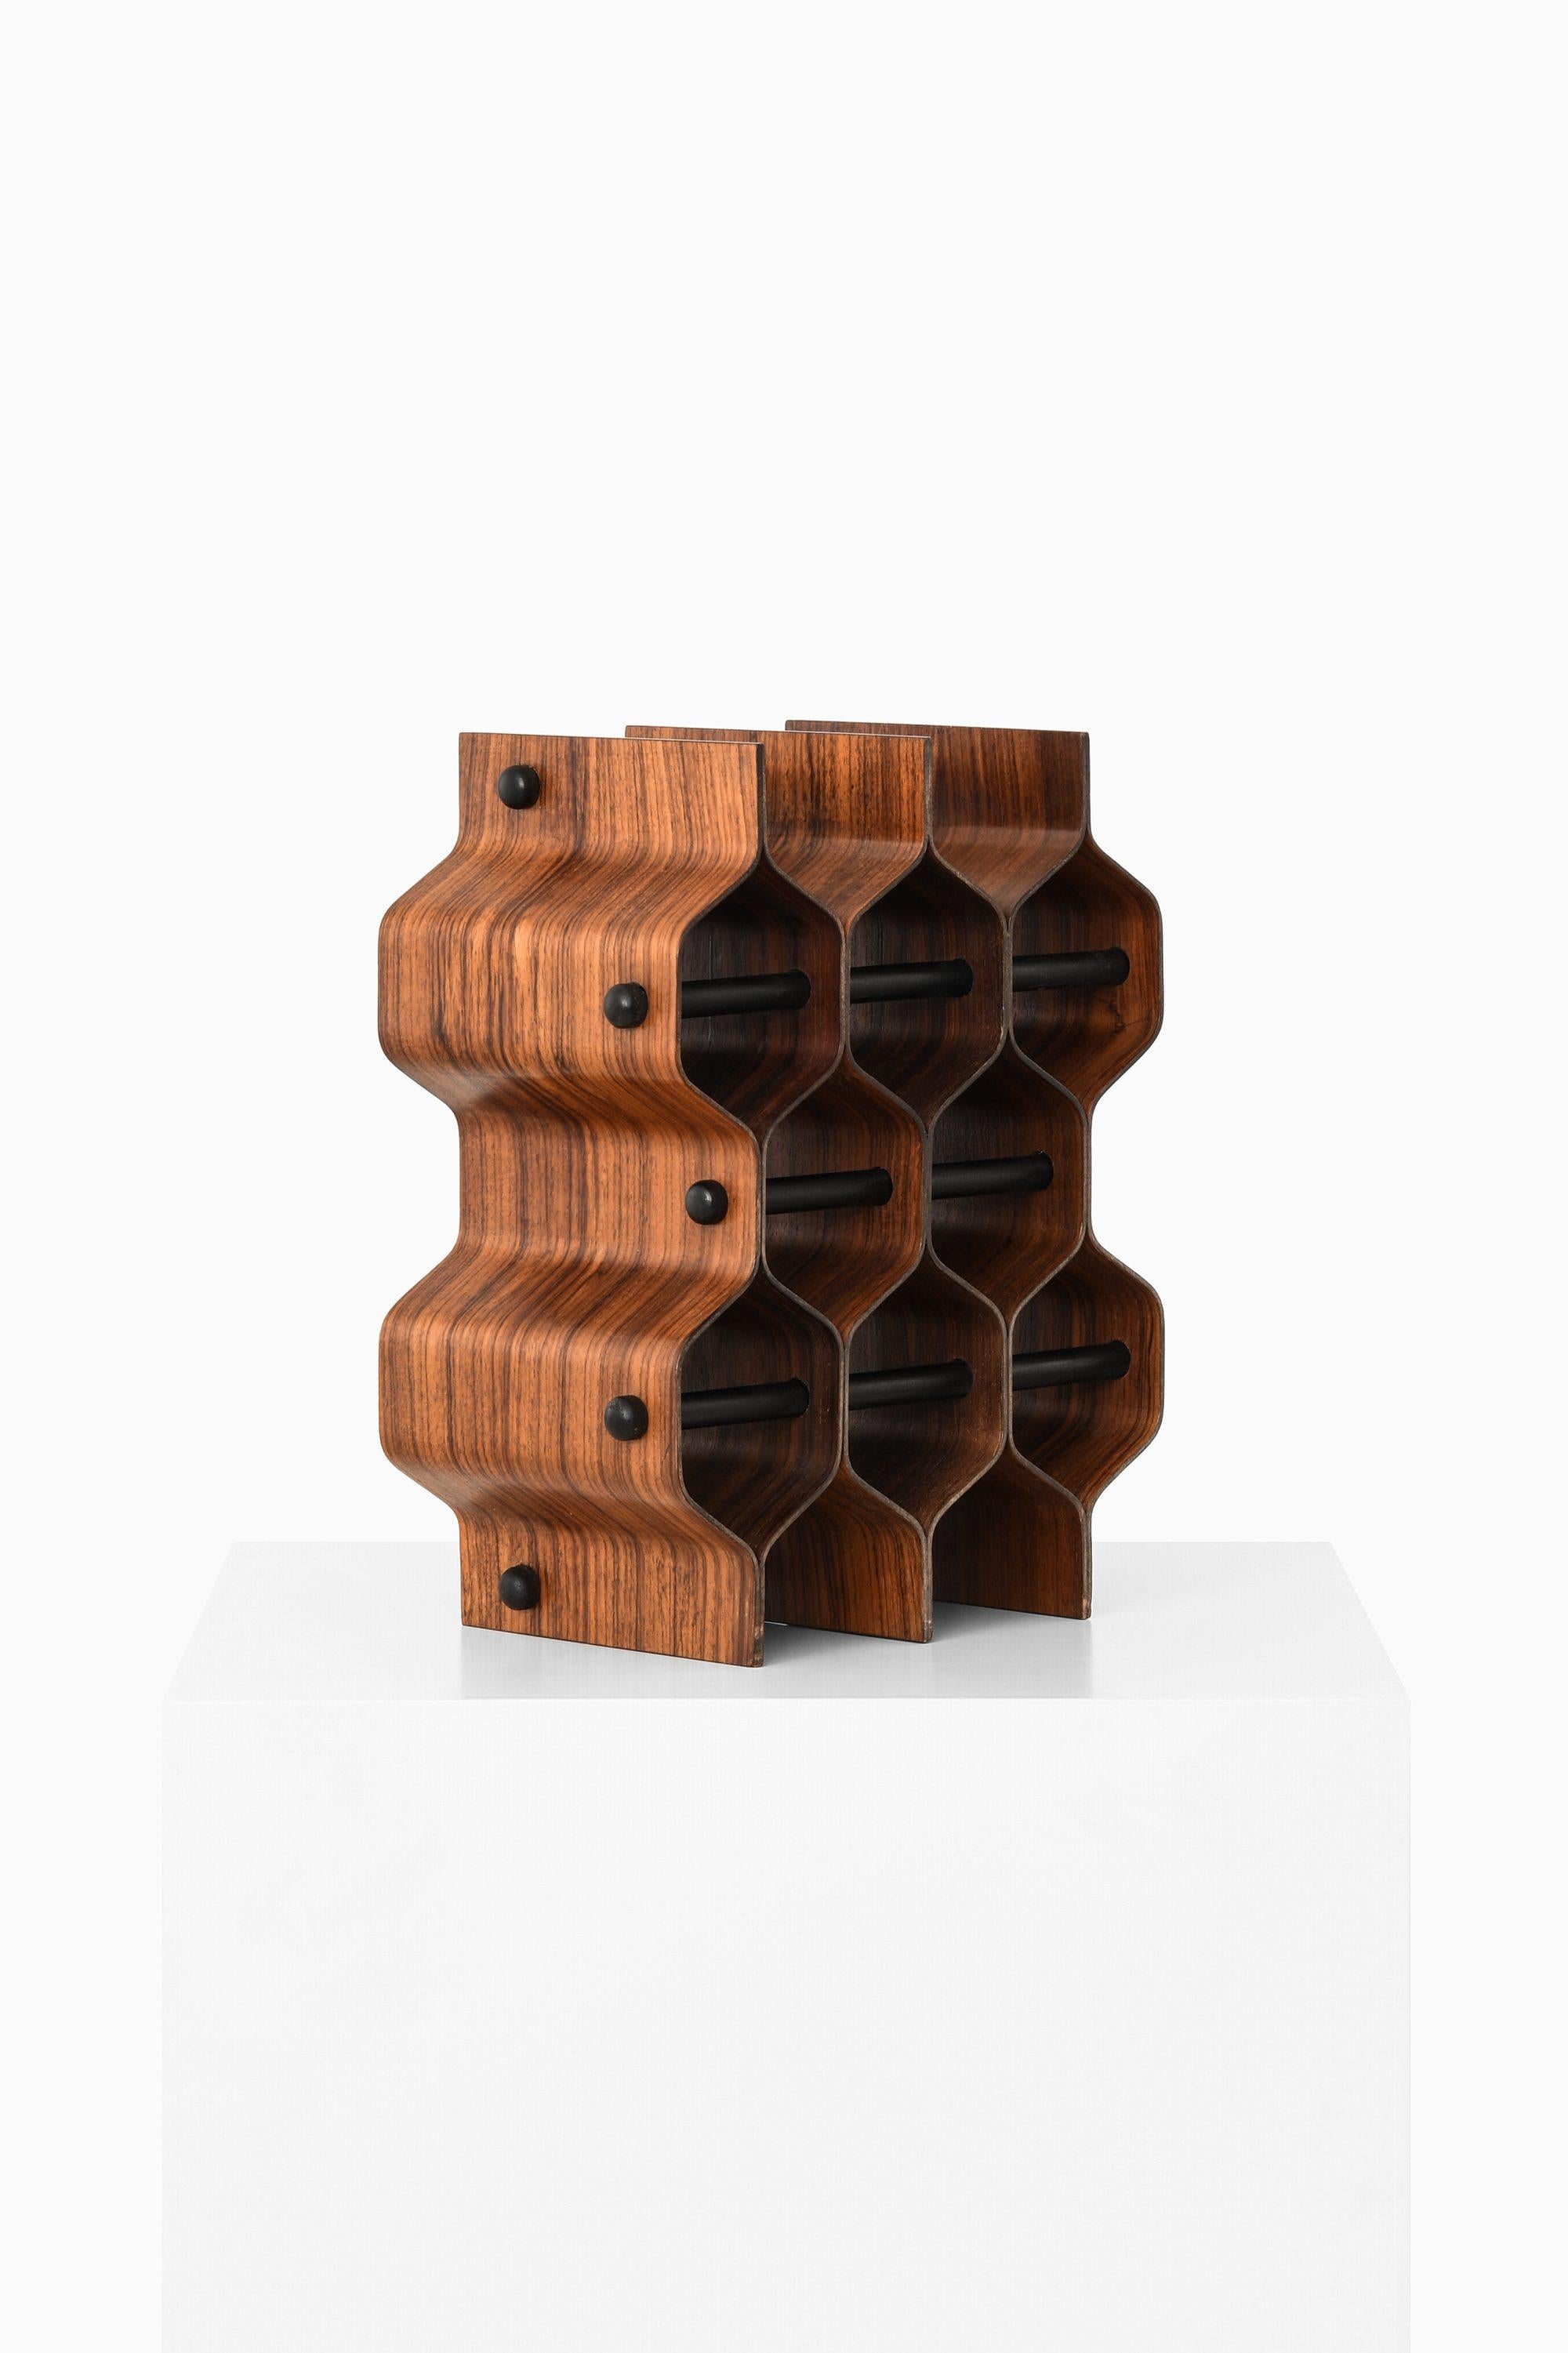 Wine Rack / Bottle Stand in Rosewood by Torsten Johansson, 1950's

Additional Information:
Material: Rosewood
Style: Mid century, Scandinavian
Produced by AB Formträ in Sweden
Dimensions (W x D x H): 30.5 x 18 x 38 cm
Condition: Good vintage